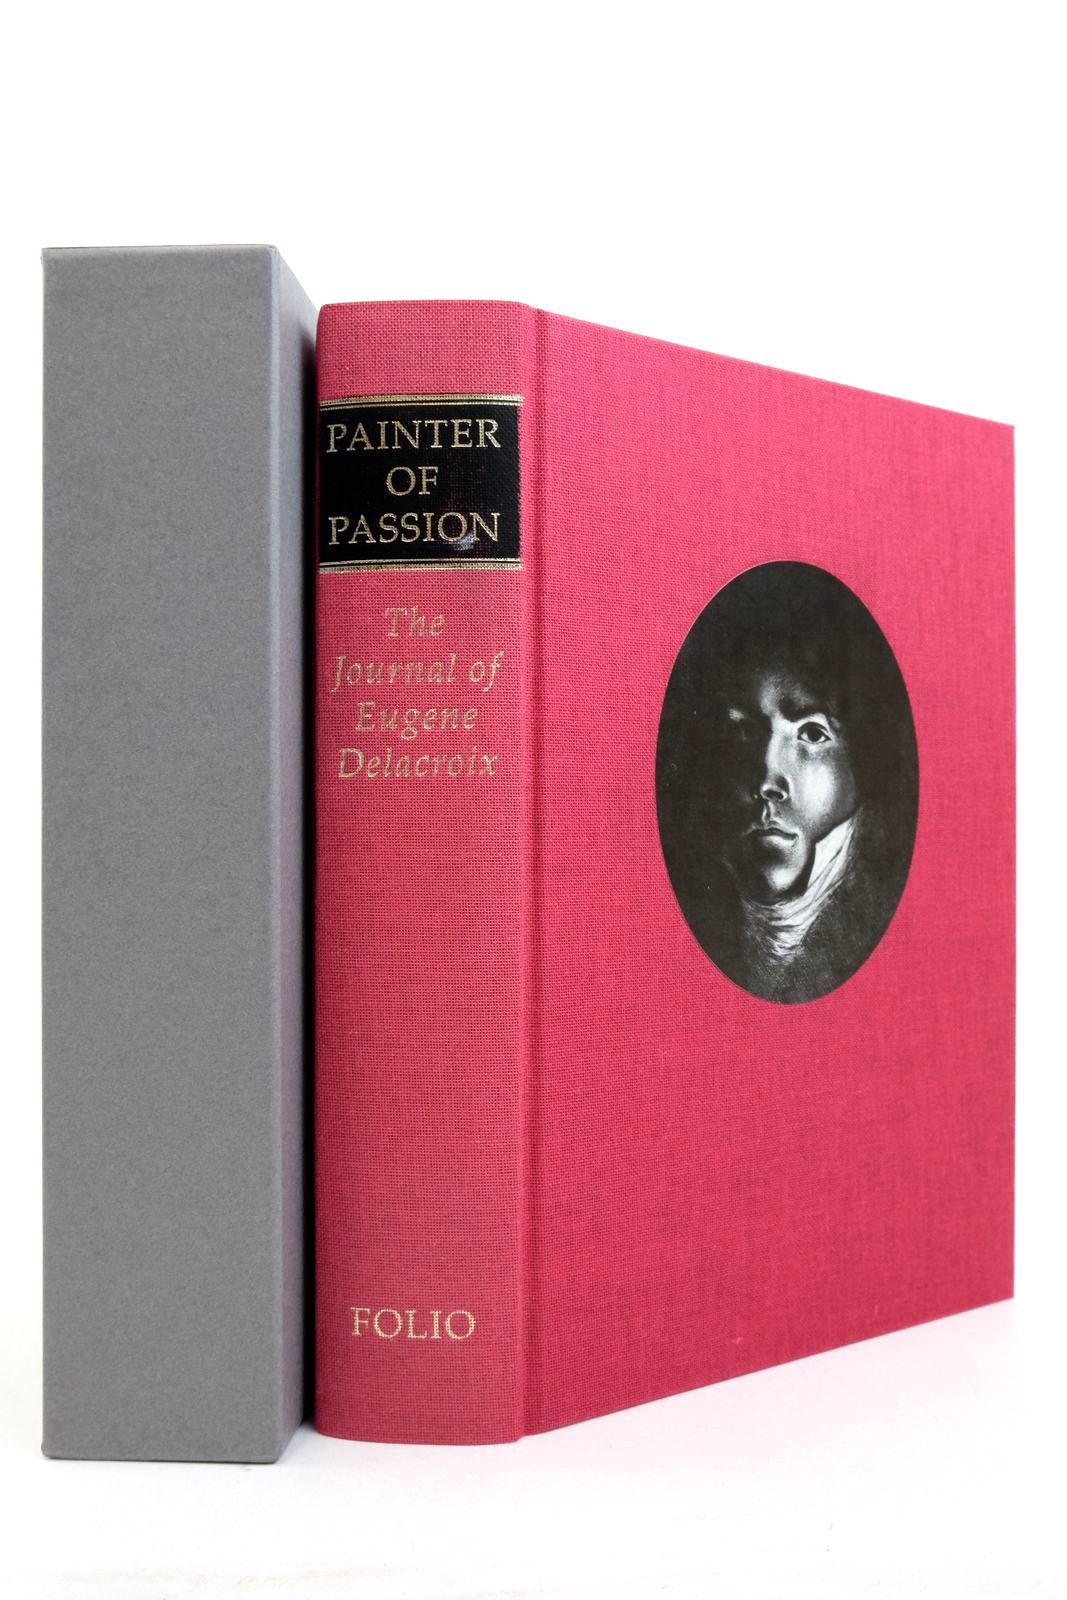 Photo of PAINTER OF PASSION: THE JOURNAL OF EUGENE DELACROIX written by Delacroix, Eugene Wellington, Hubert published by Folio Society (STOCK CODE: 2138248)  for sale by Stella & Rose's Books